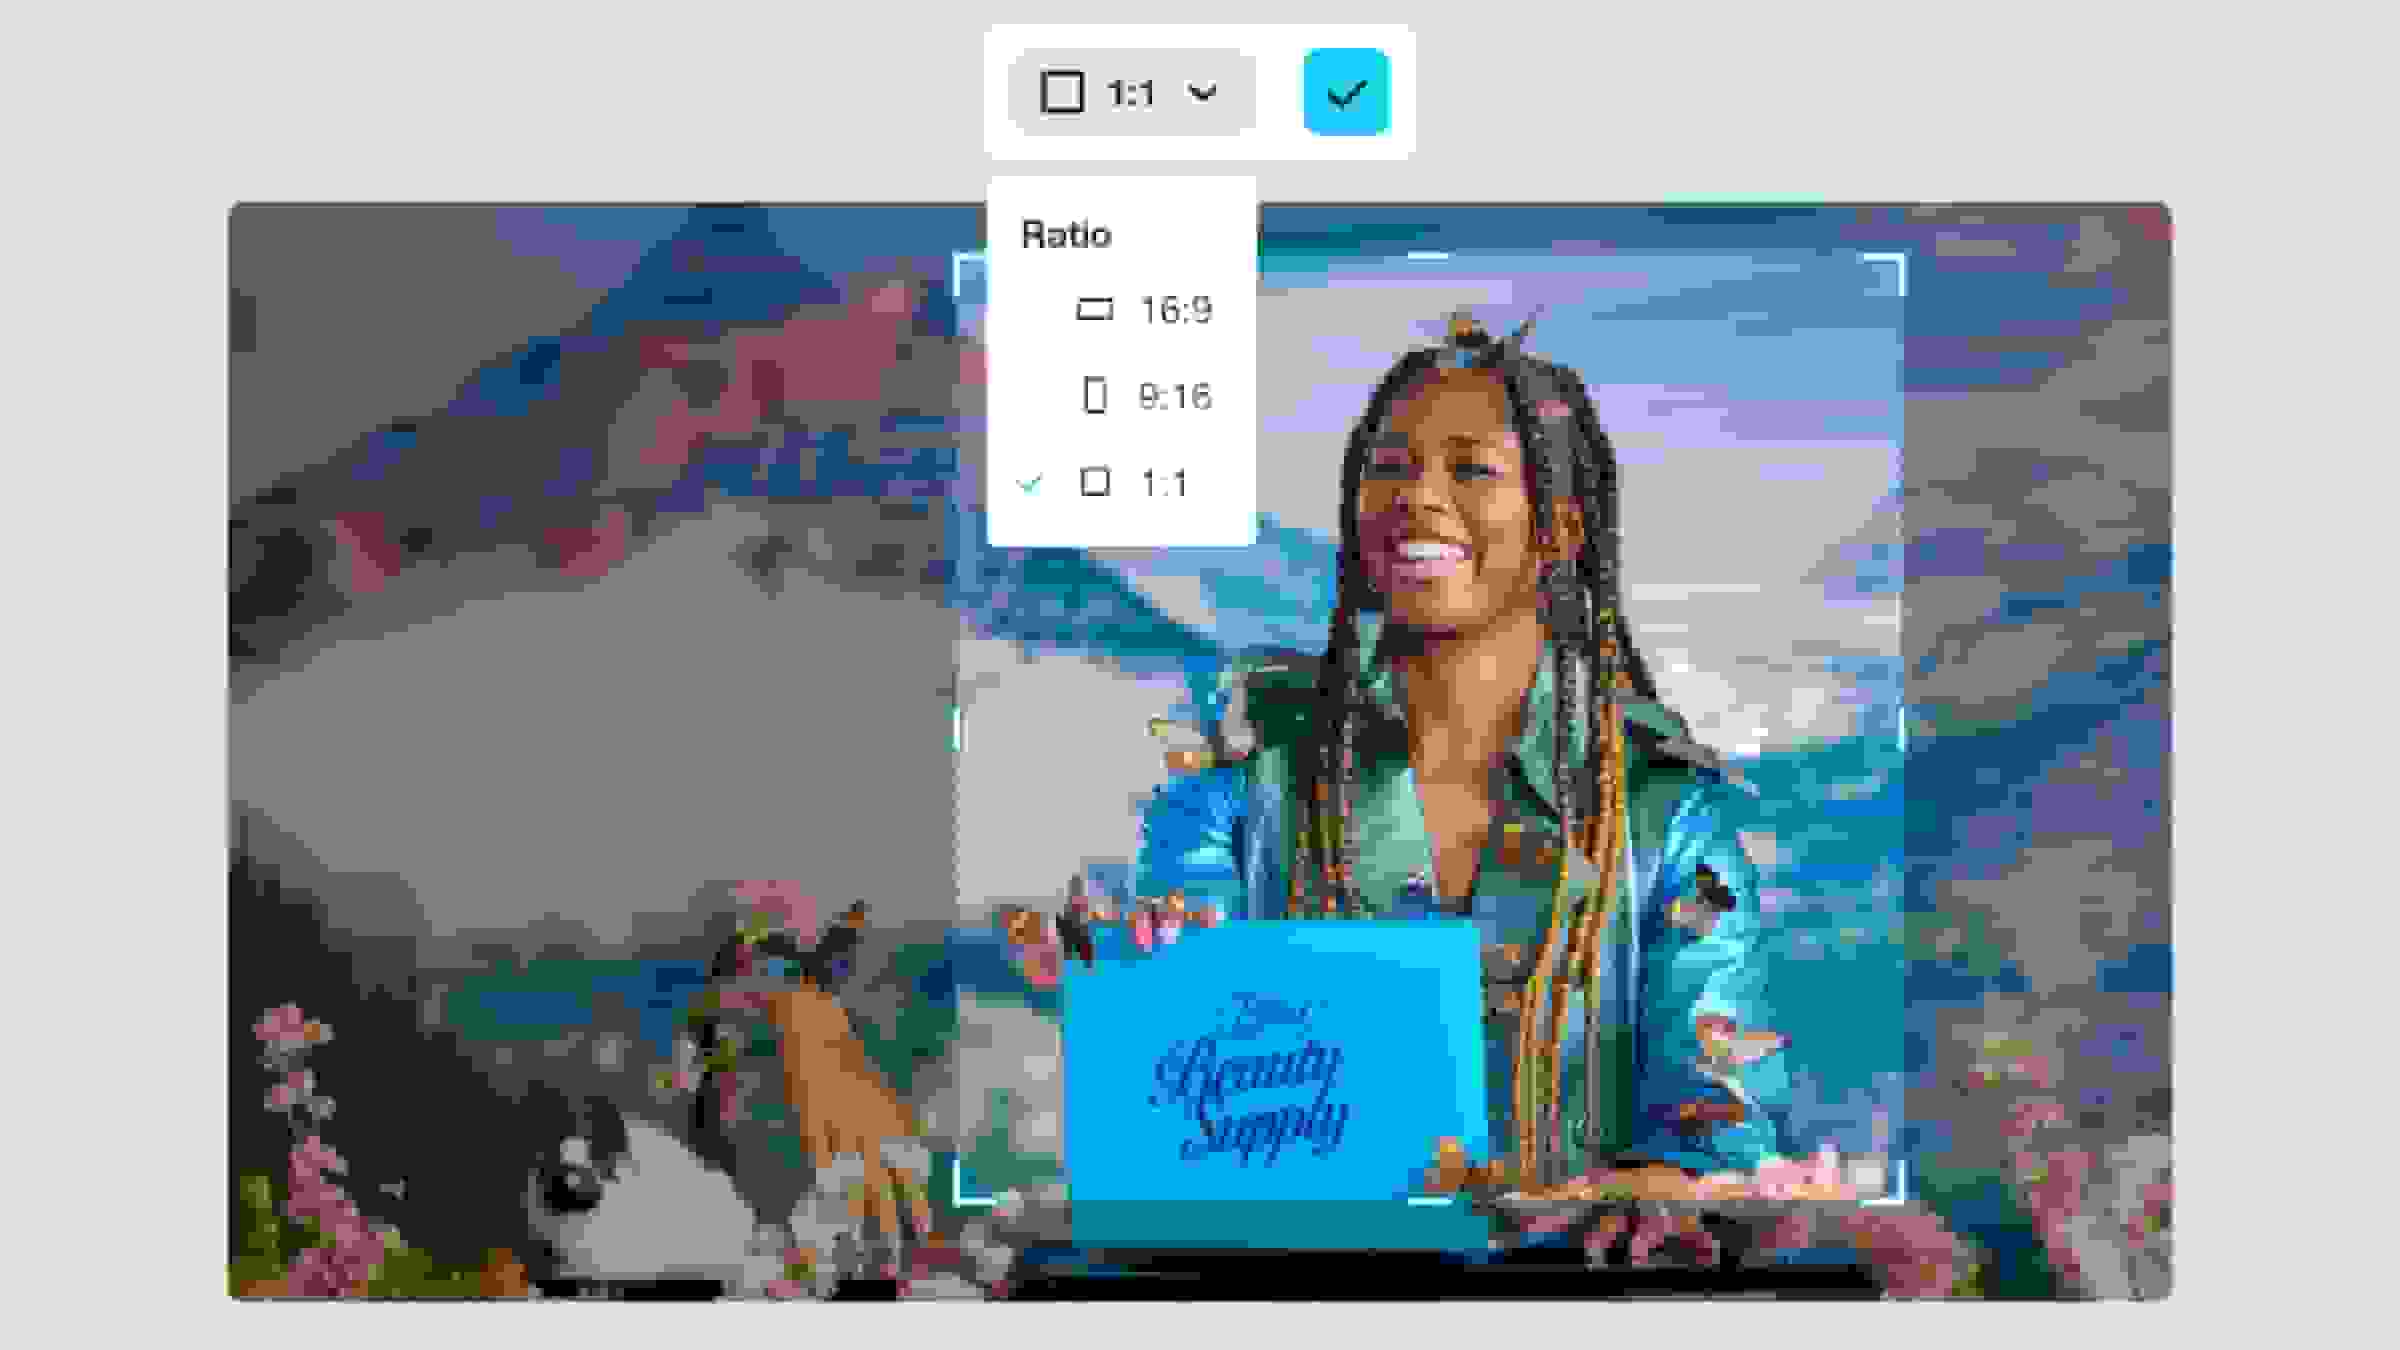 Using the Vimeo video cropper to scale a video of a woman by changing the aspect ratio.